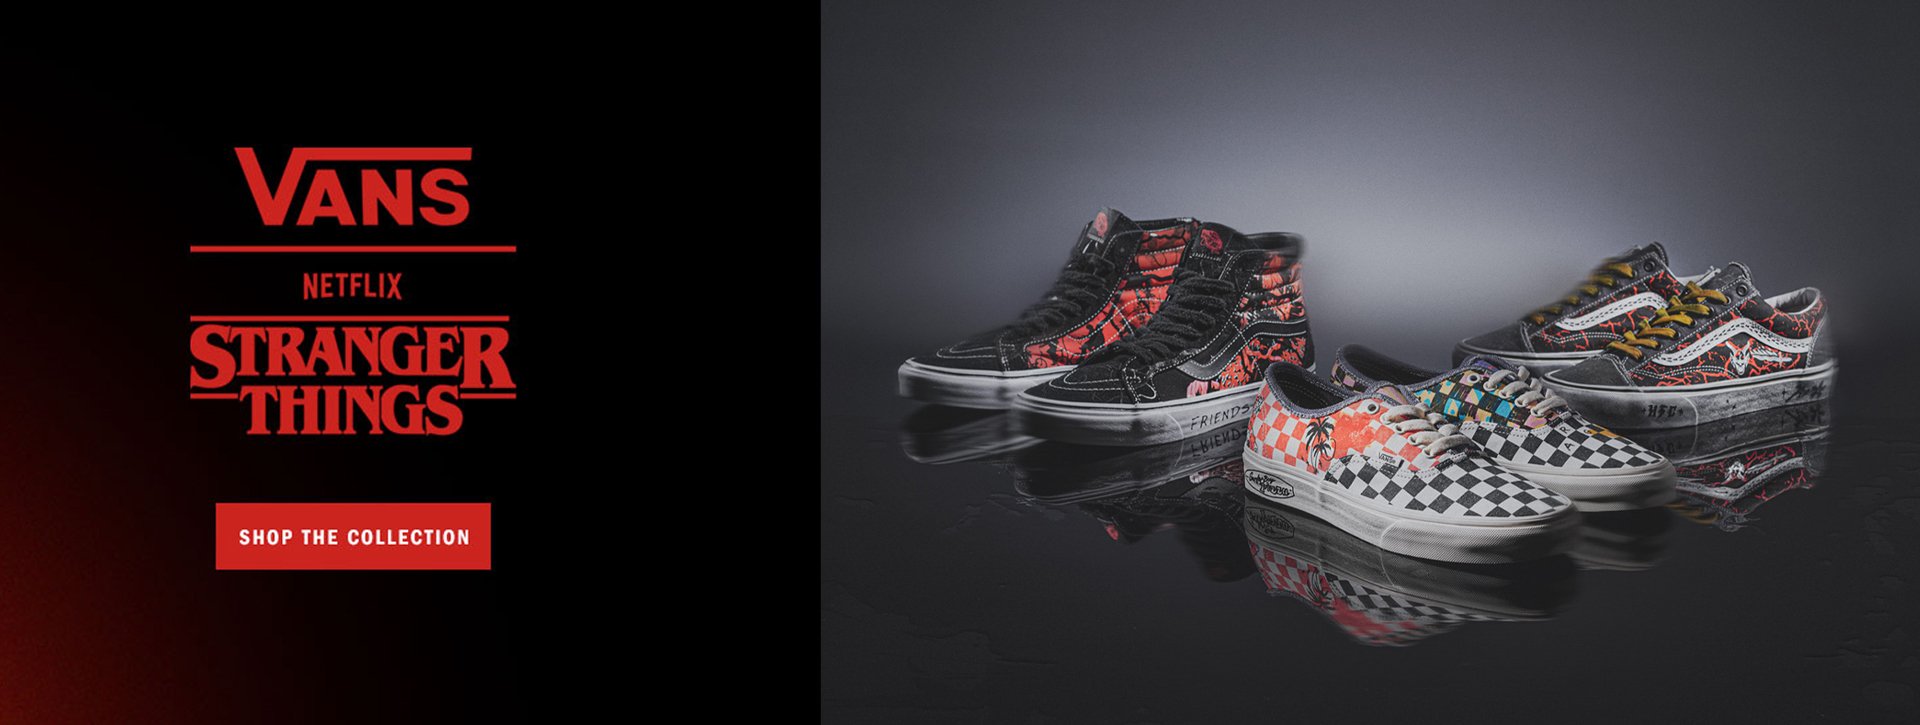 Vans x Stranger Things Sneakers Collection